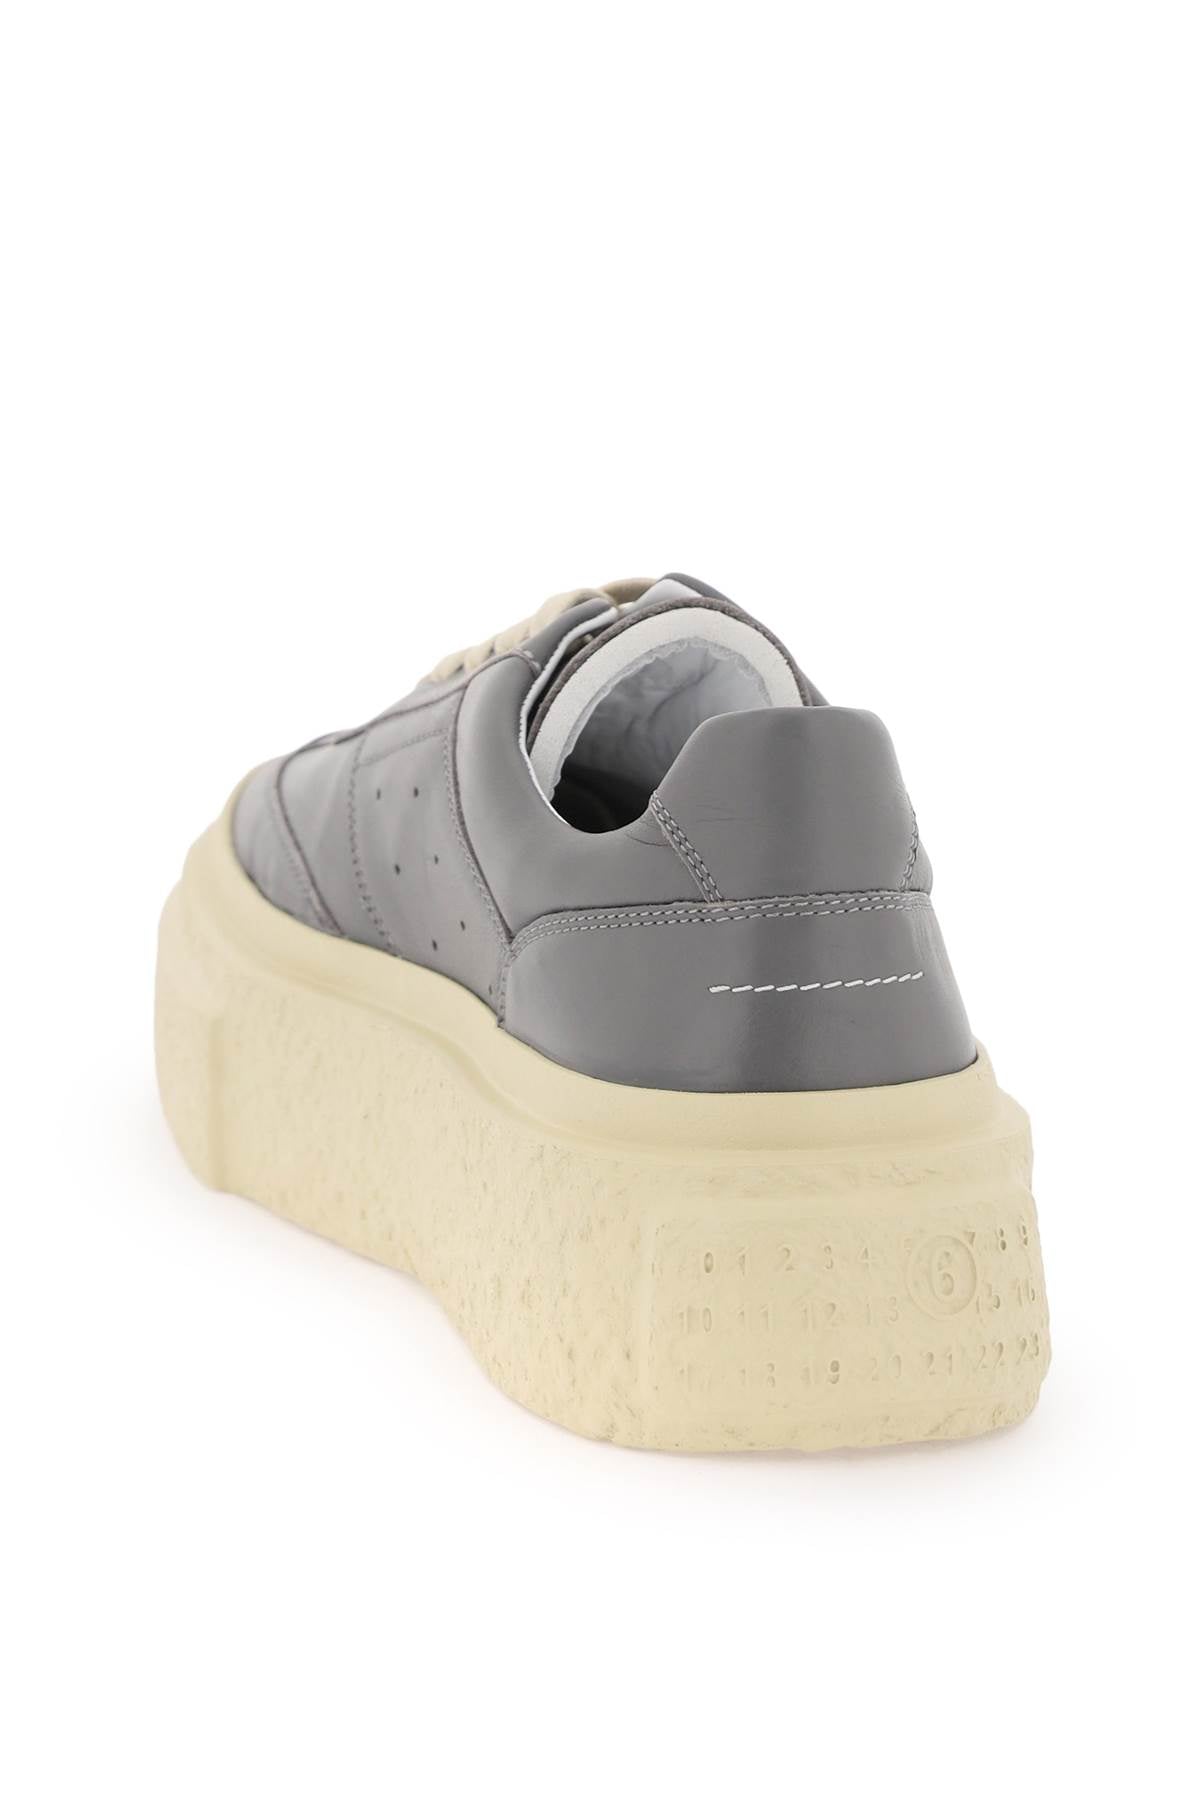 Mm6 maison margiela chunky sole gambetta sneakers with